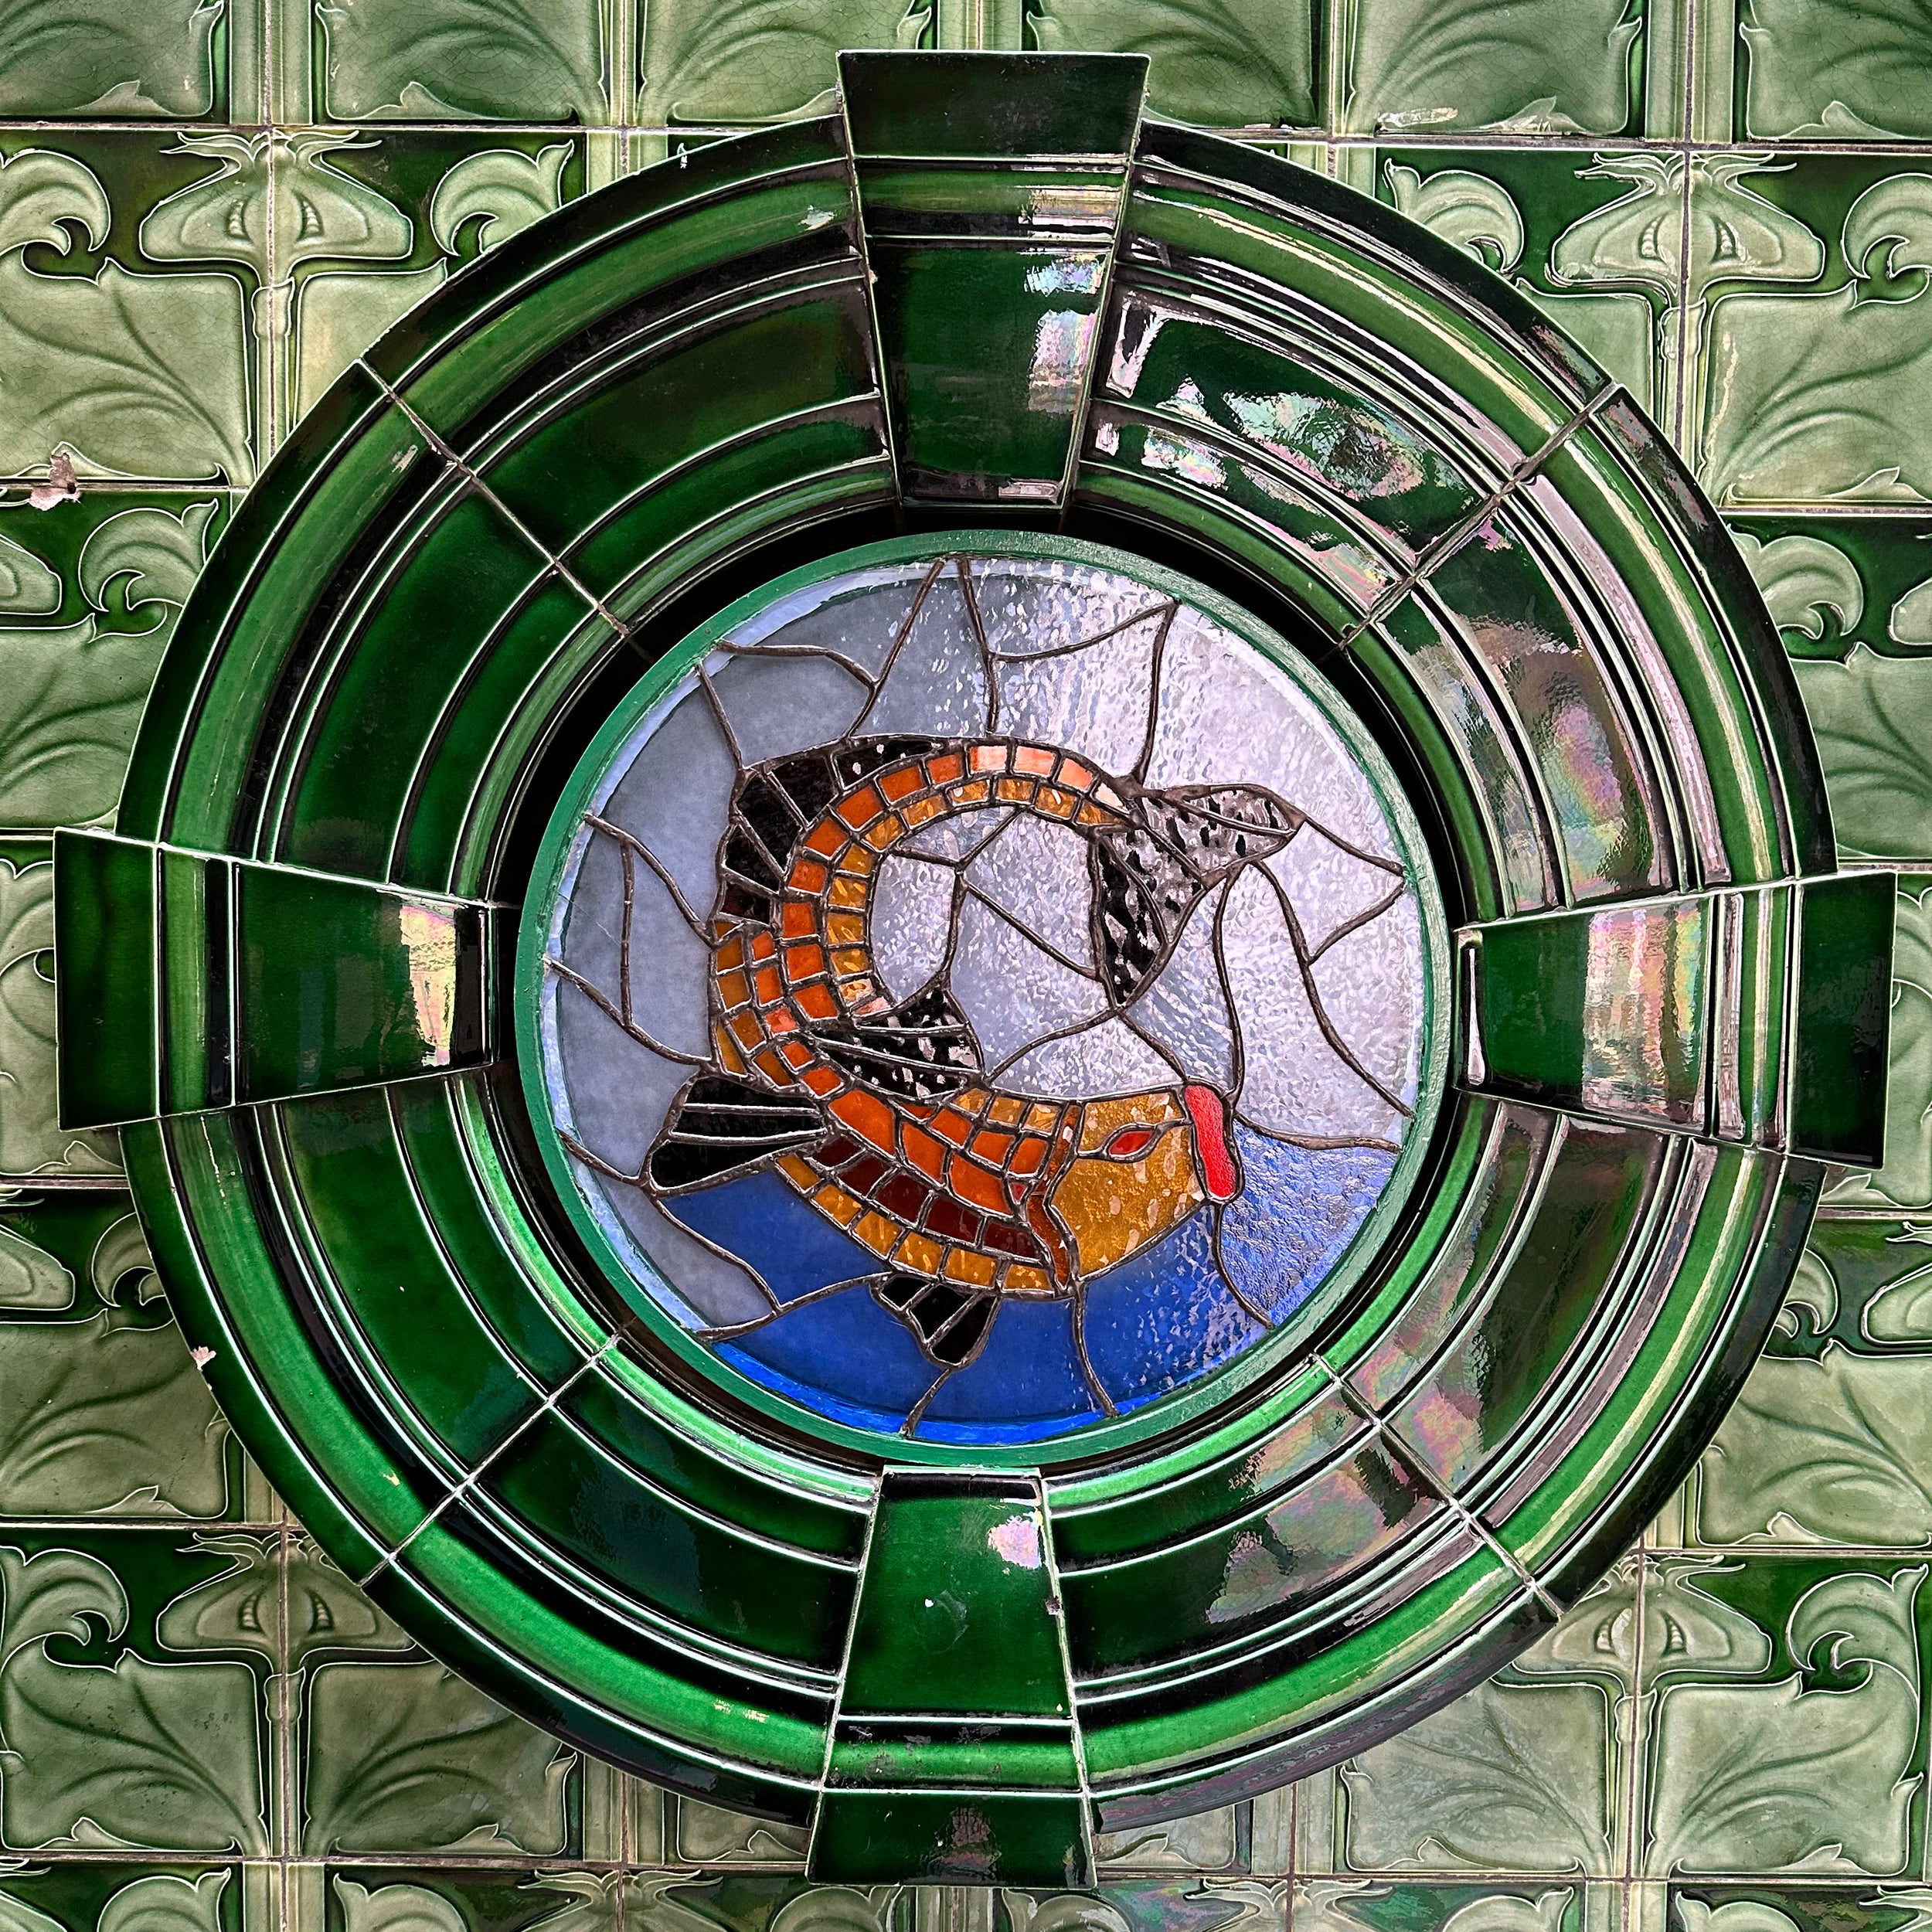 Circular stained glass window of a fish surrounded by green tiles